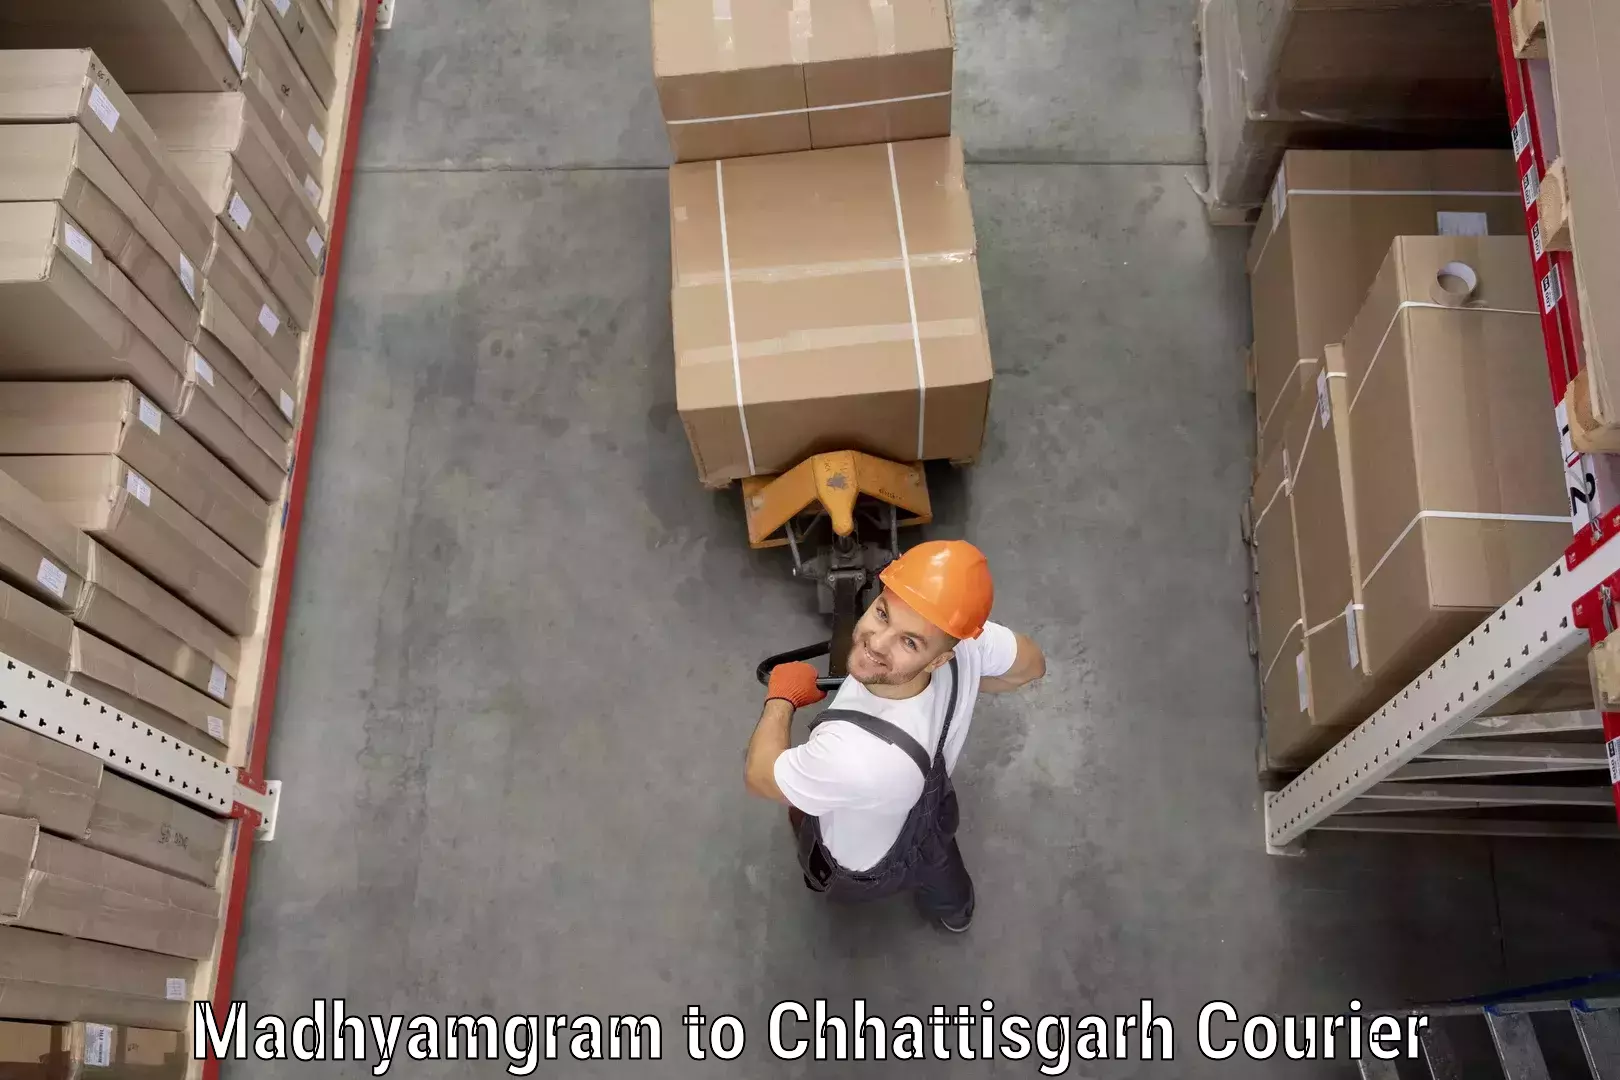 Customer-oriented courier services in Madhyamgram to Chhattisgarh